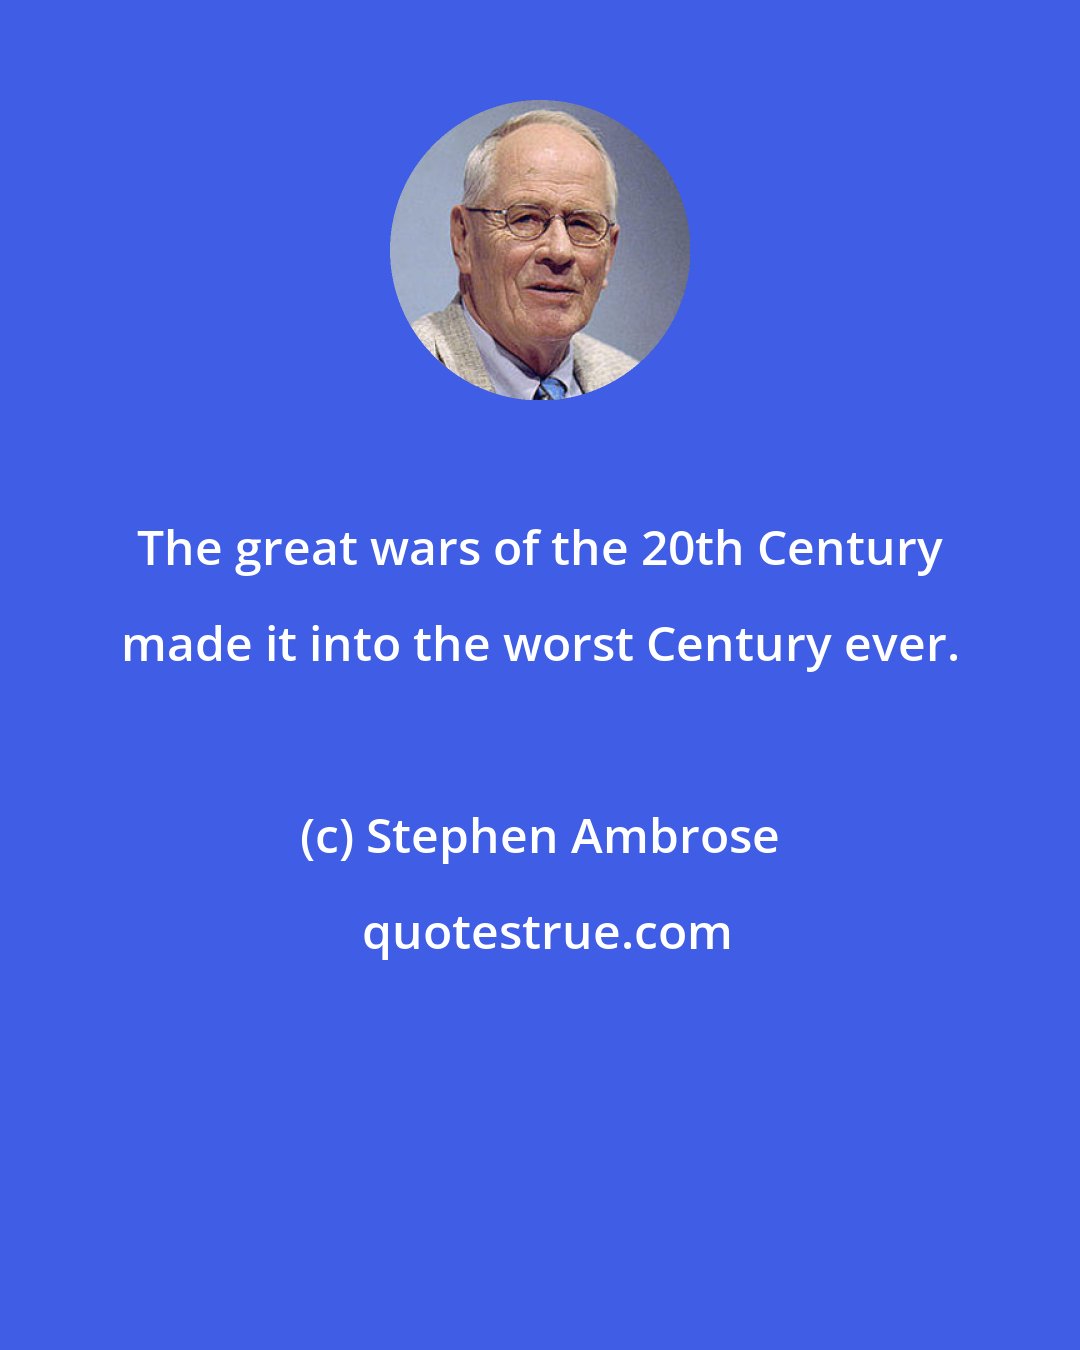 Stephen Ambrose: The great wars of the 20th Century made it into the worst Century ever.